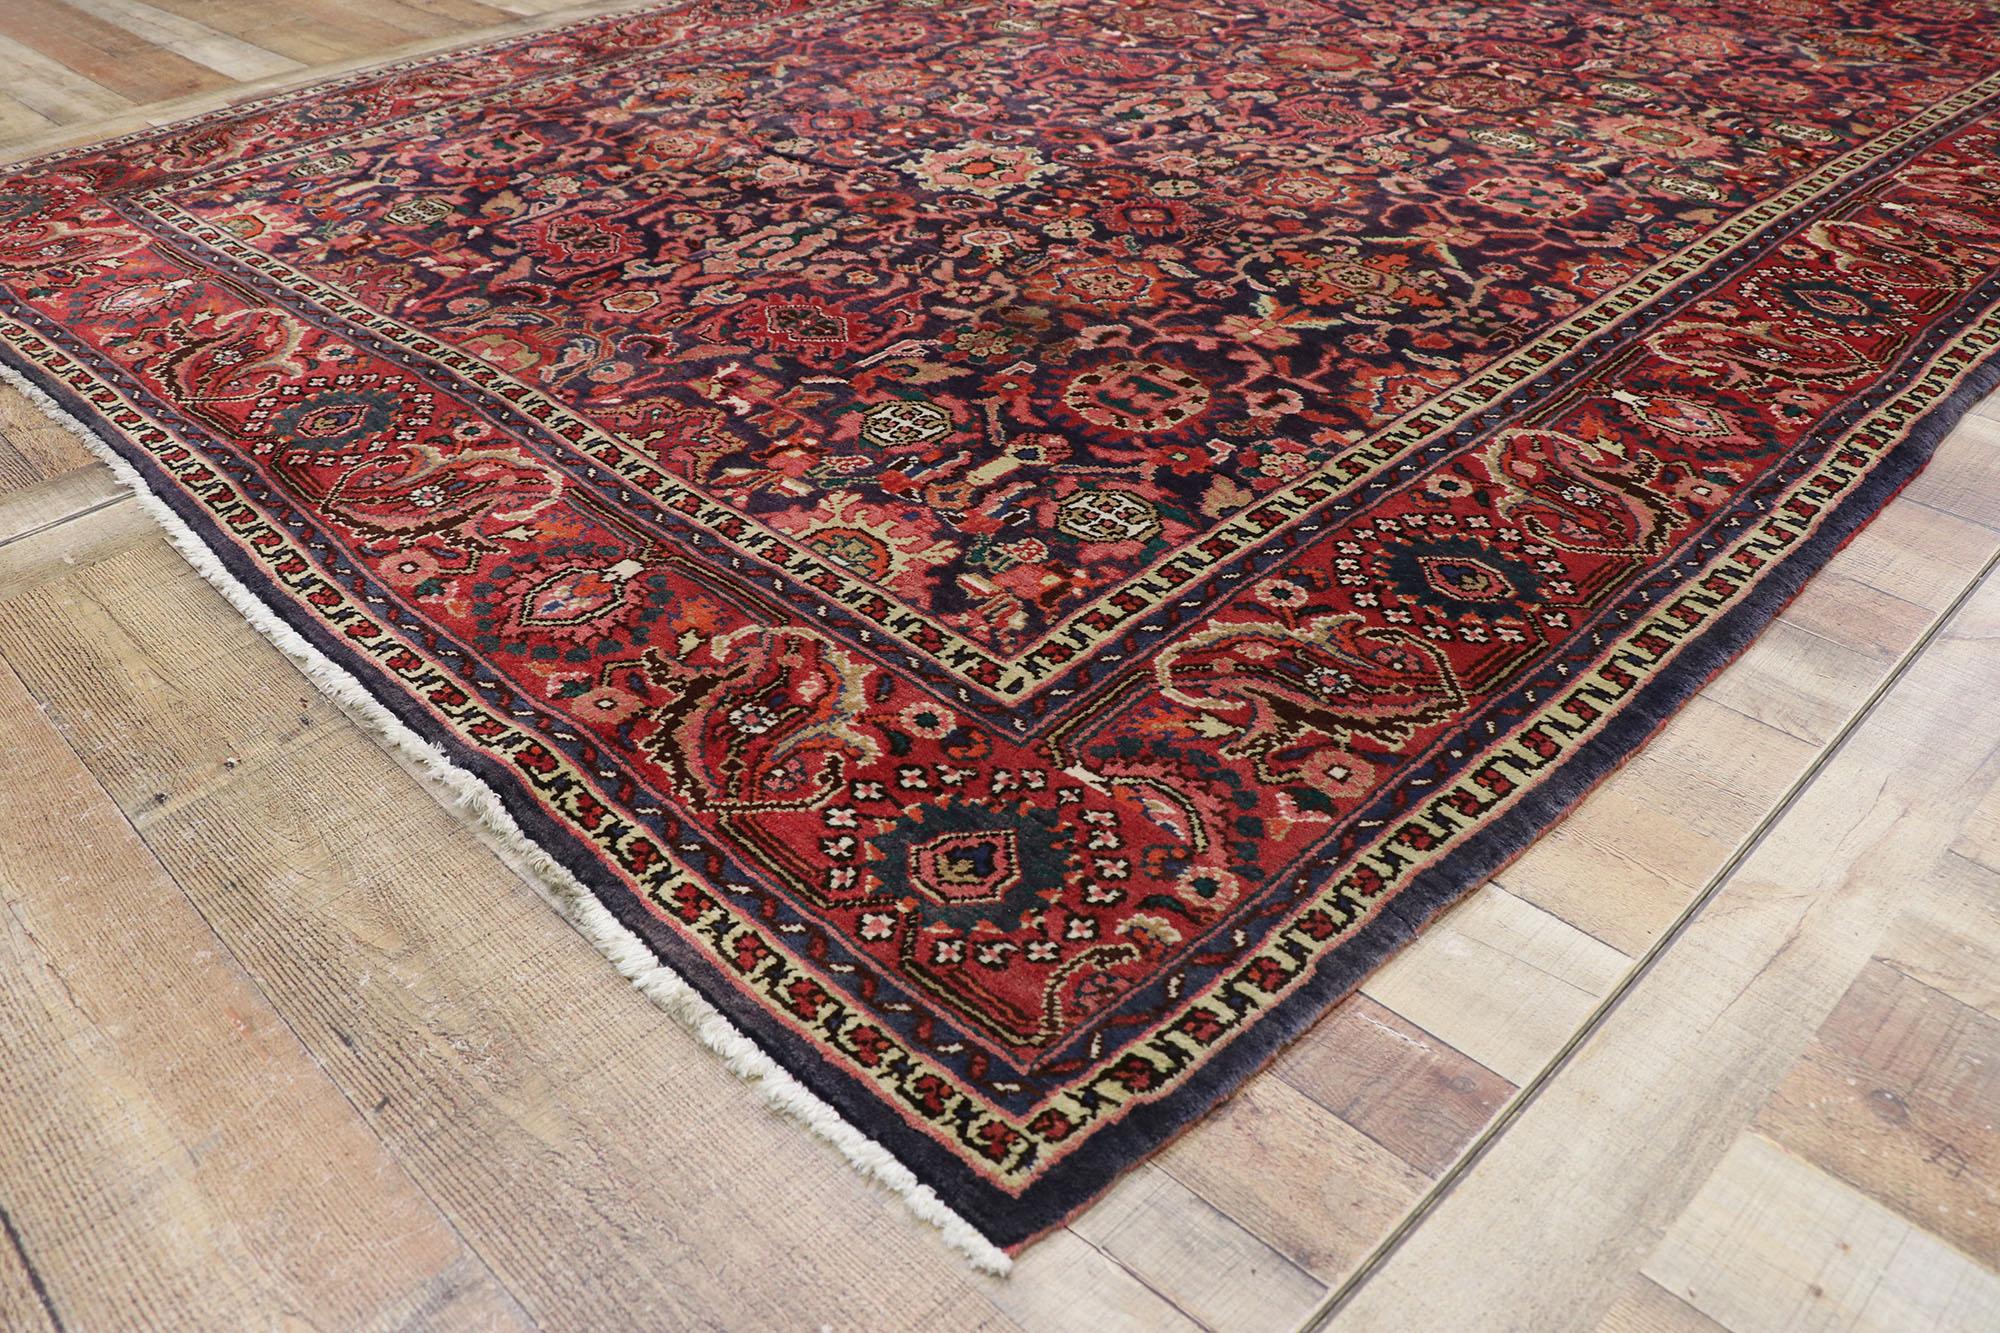 20th Century Antique Persian Malayer Rug with Regal Victorian Style